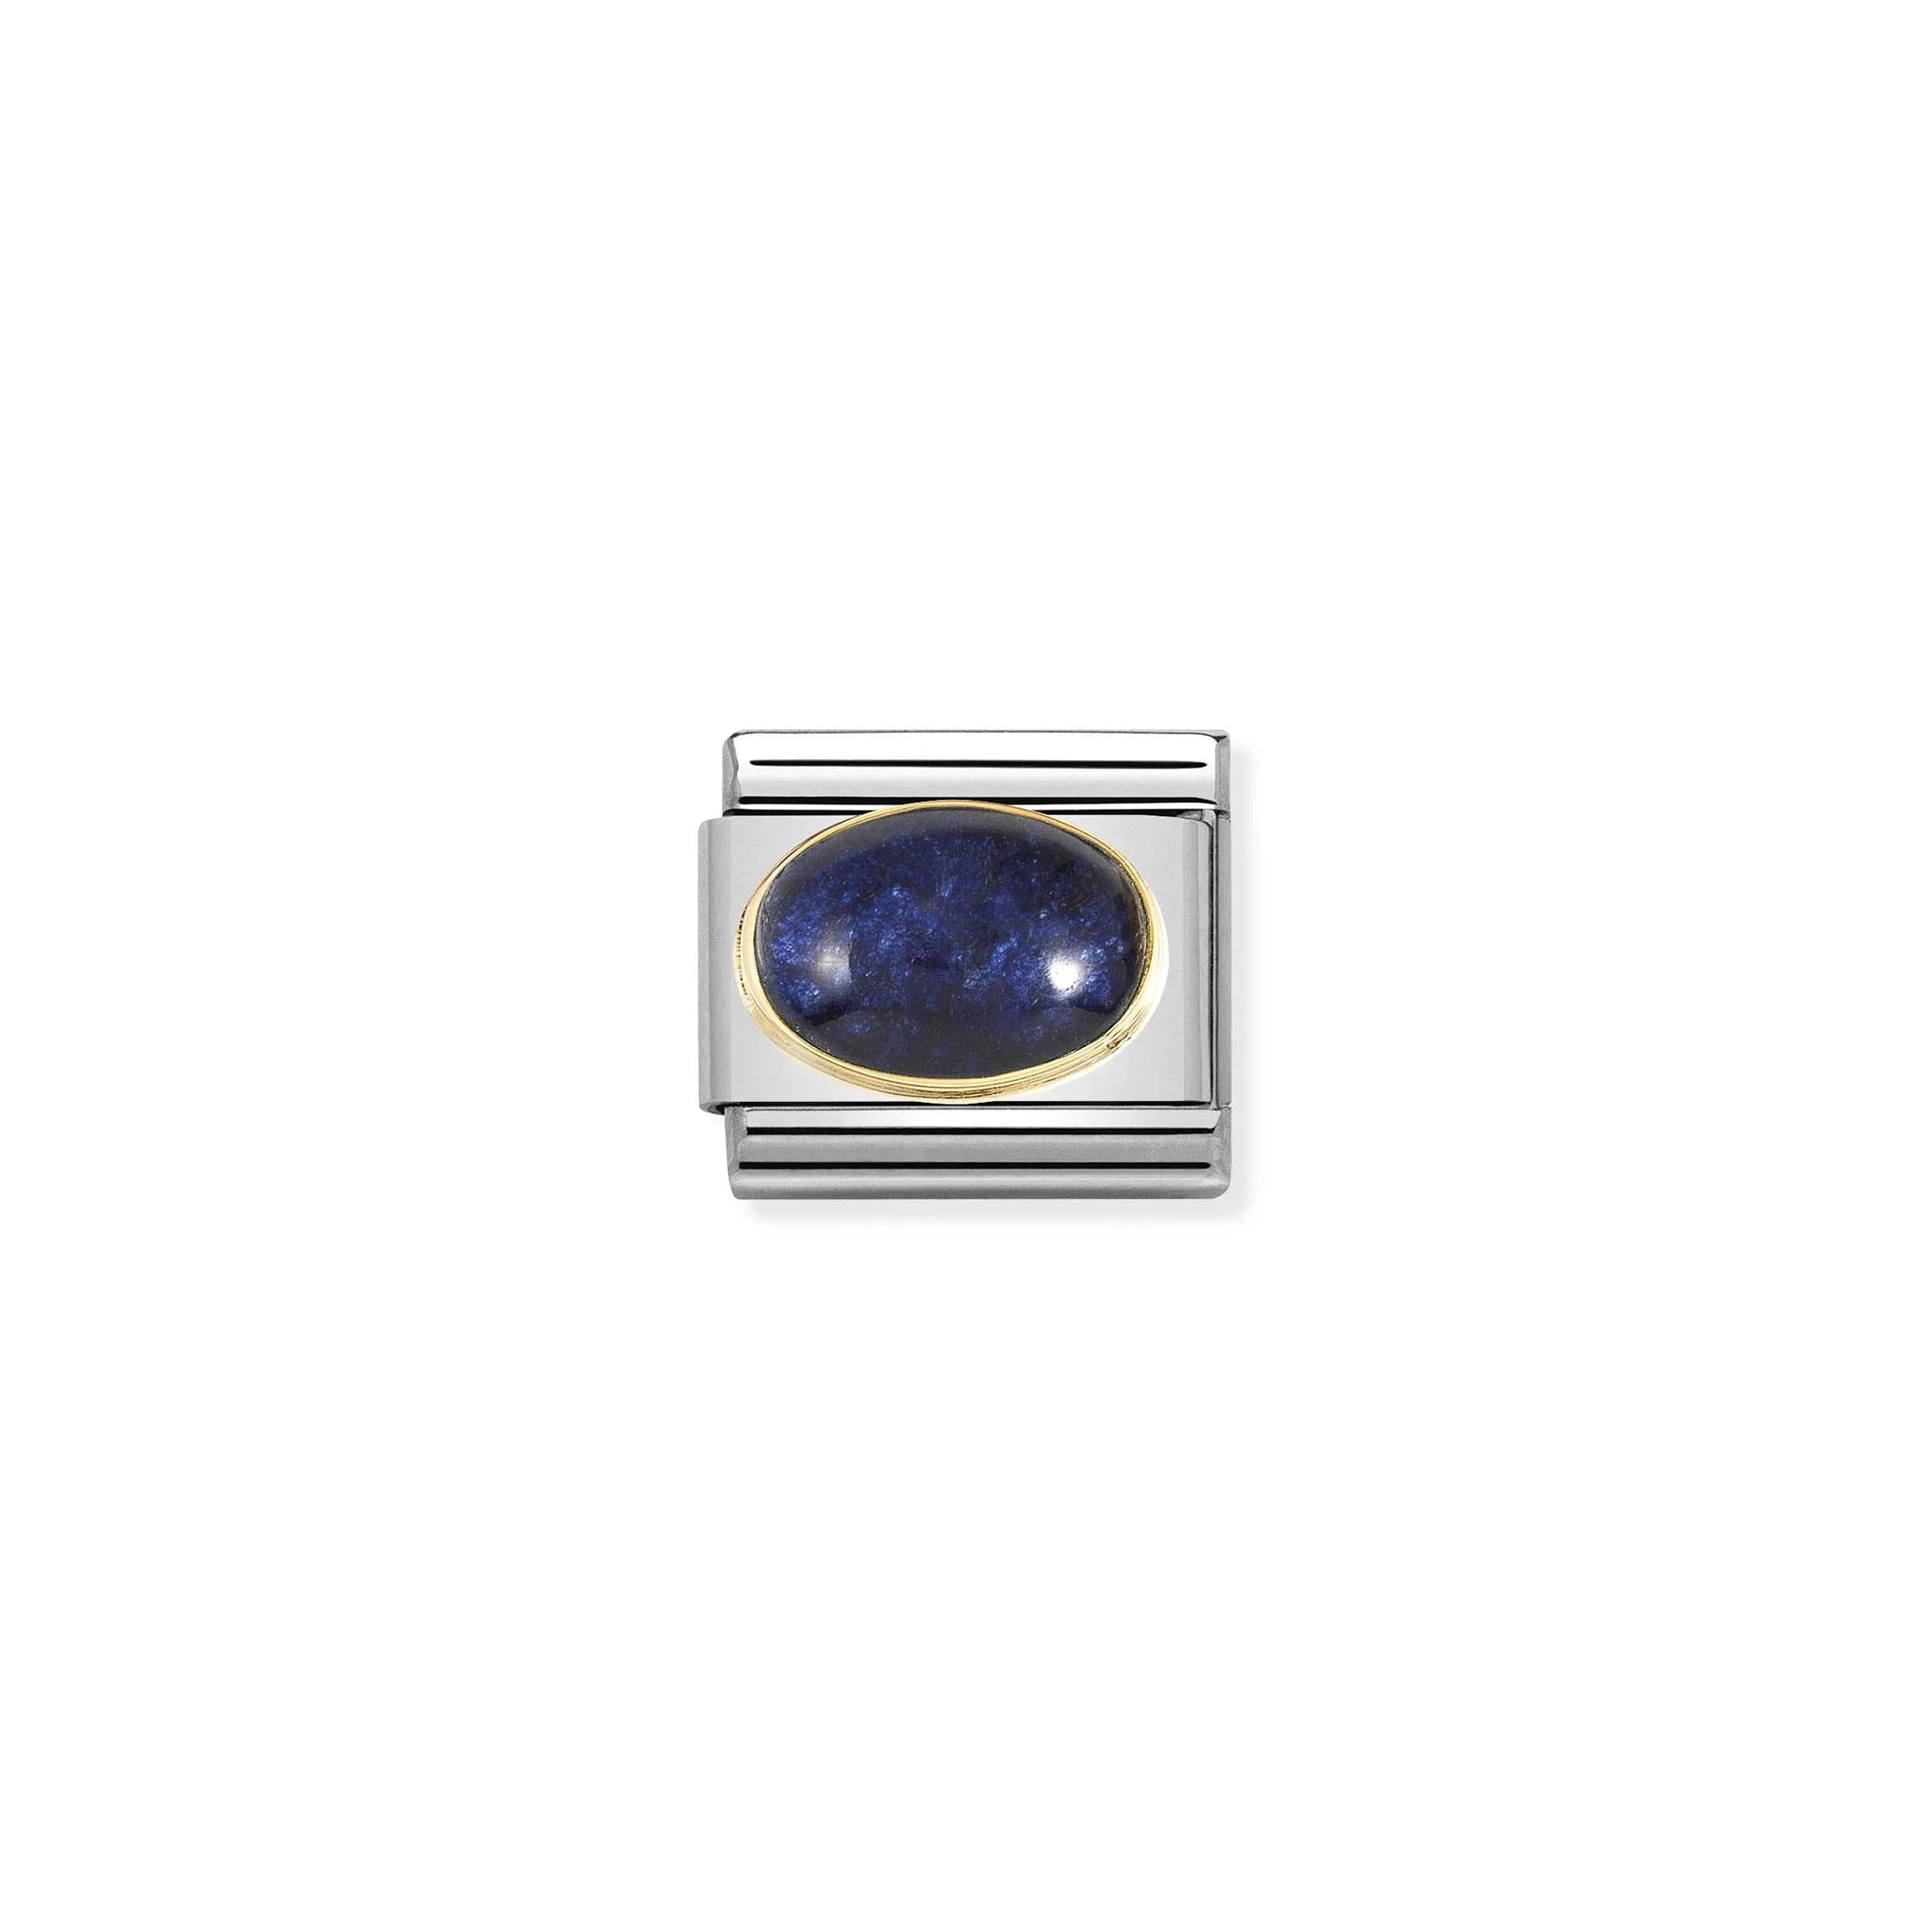 A Nomination charm link featuring an oval blue rock crystal stone with gold surround